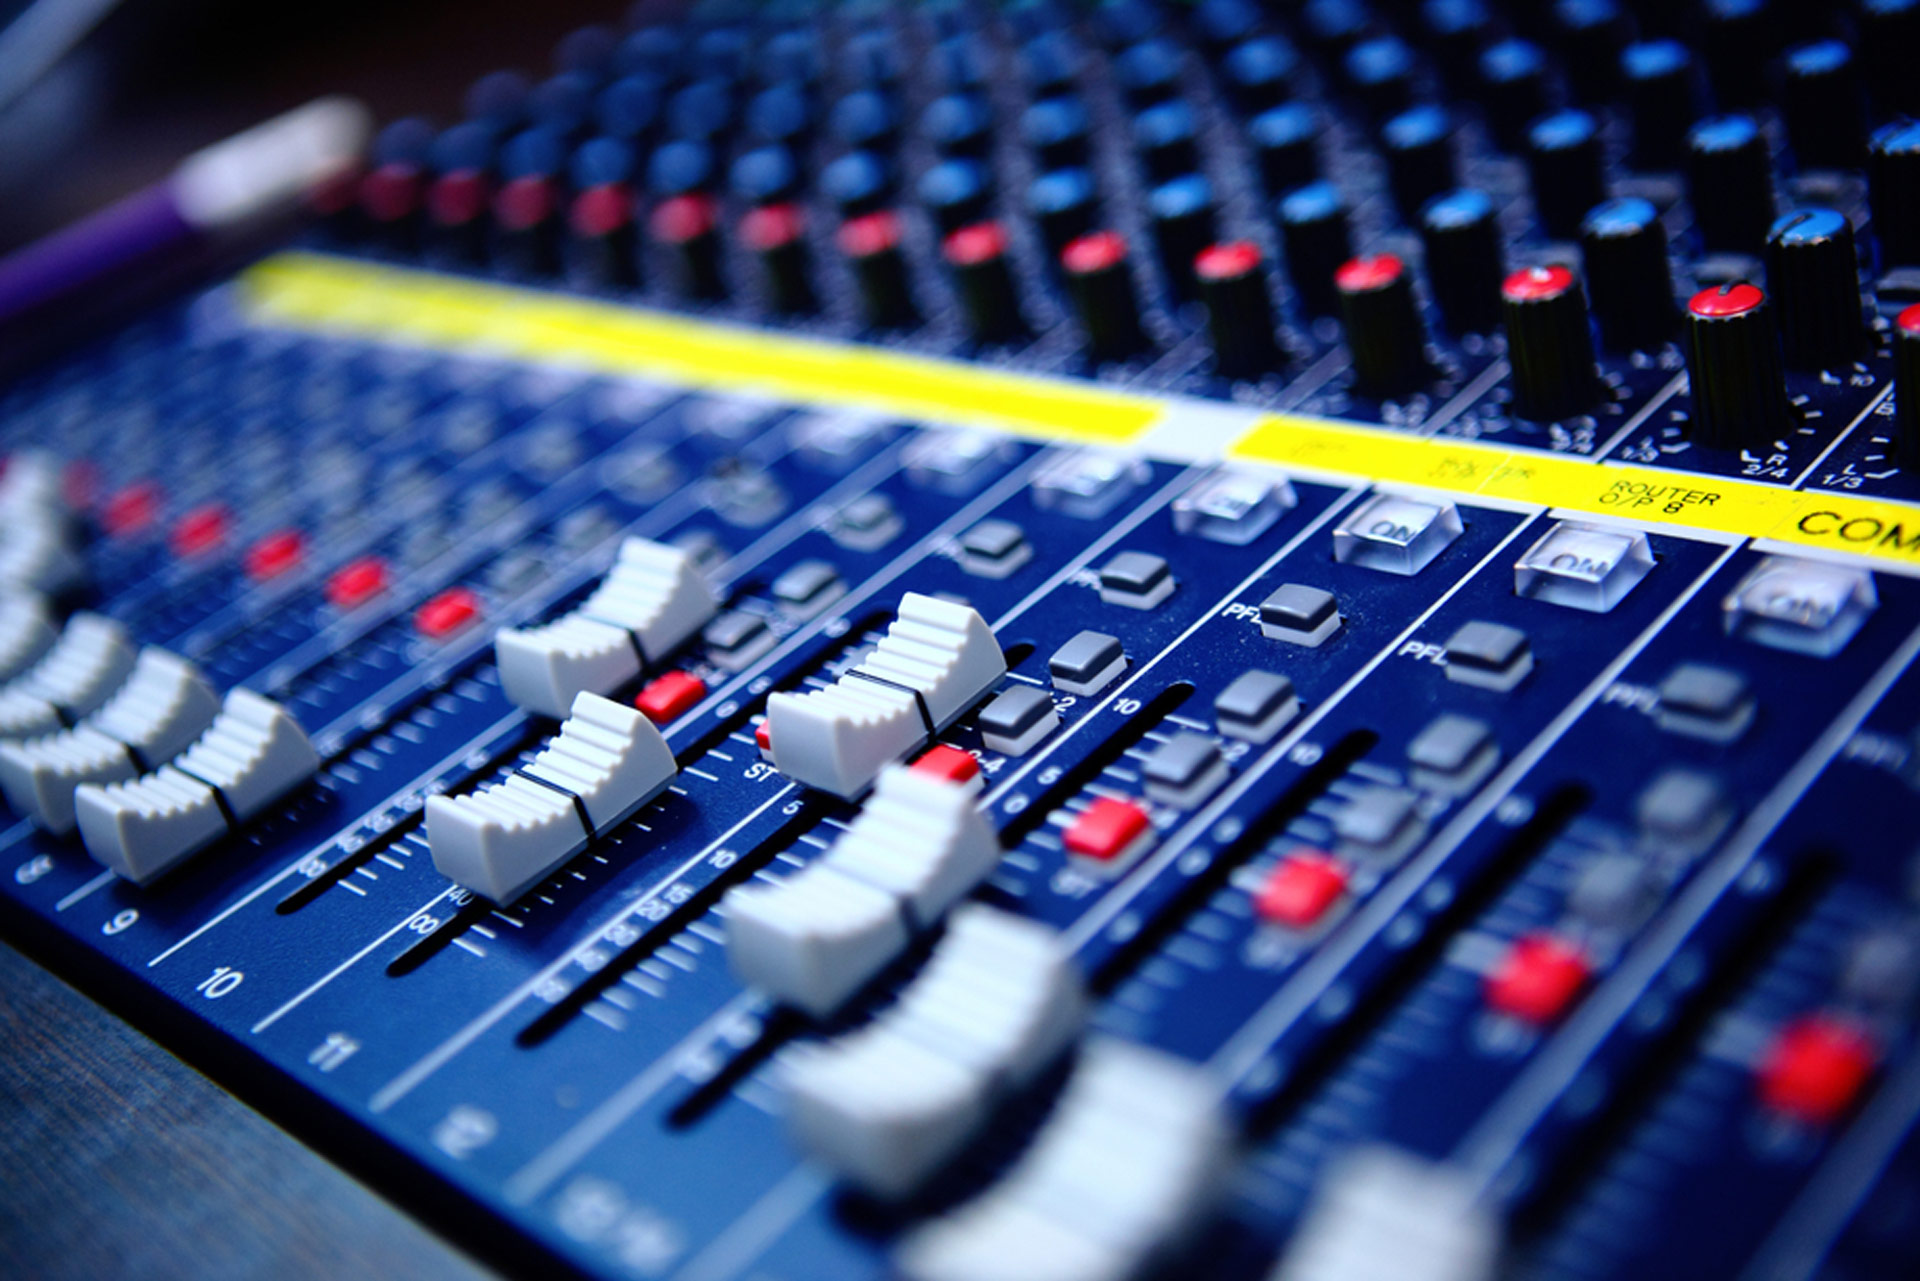 Making Waves - Acoustics for Sound Engineers